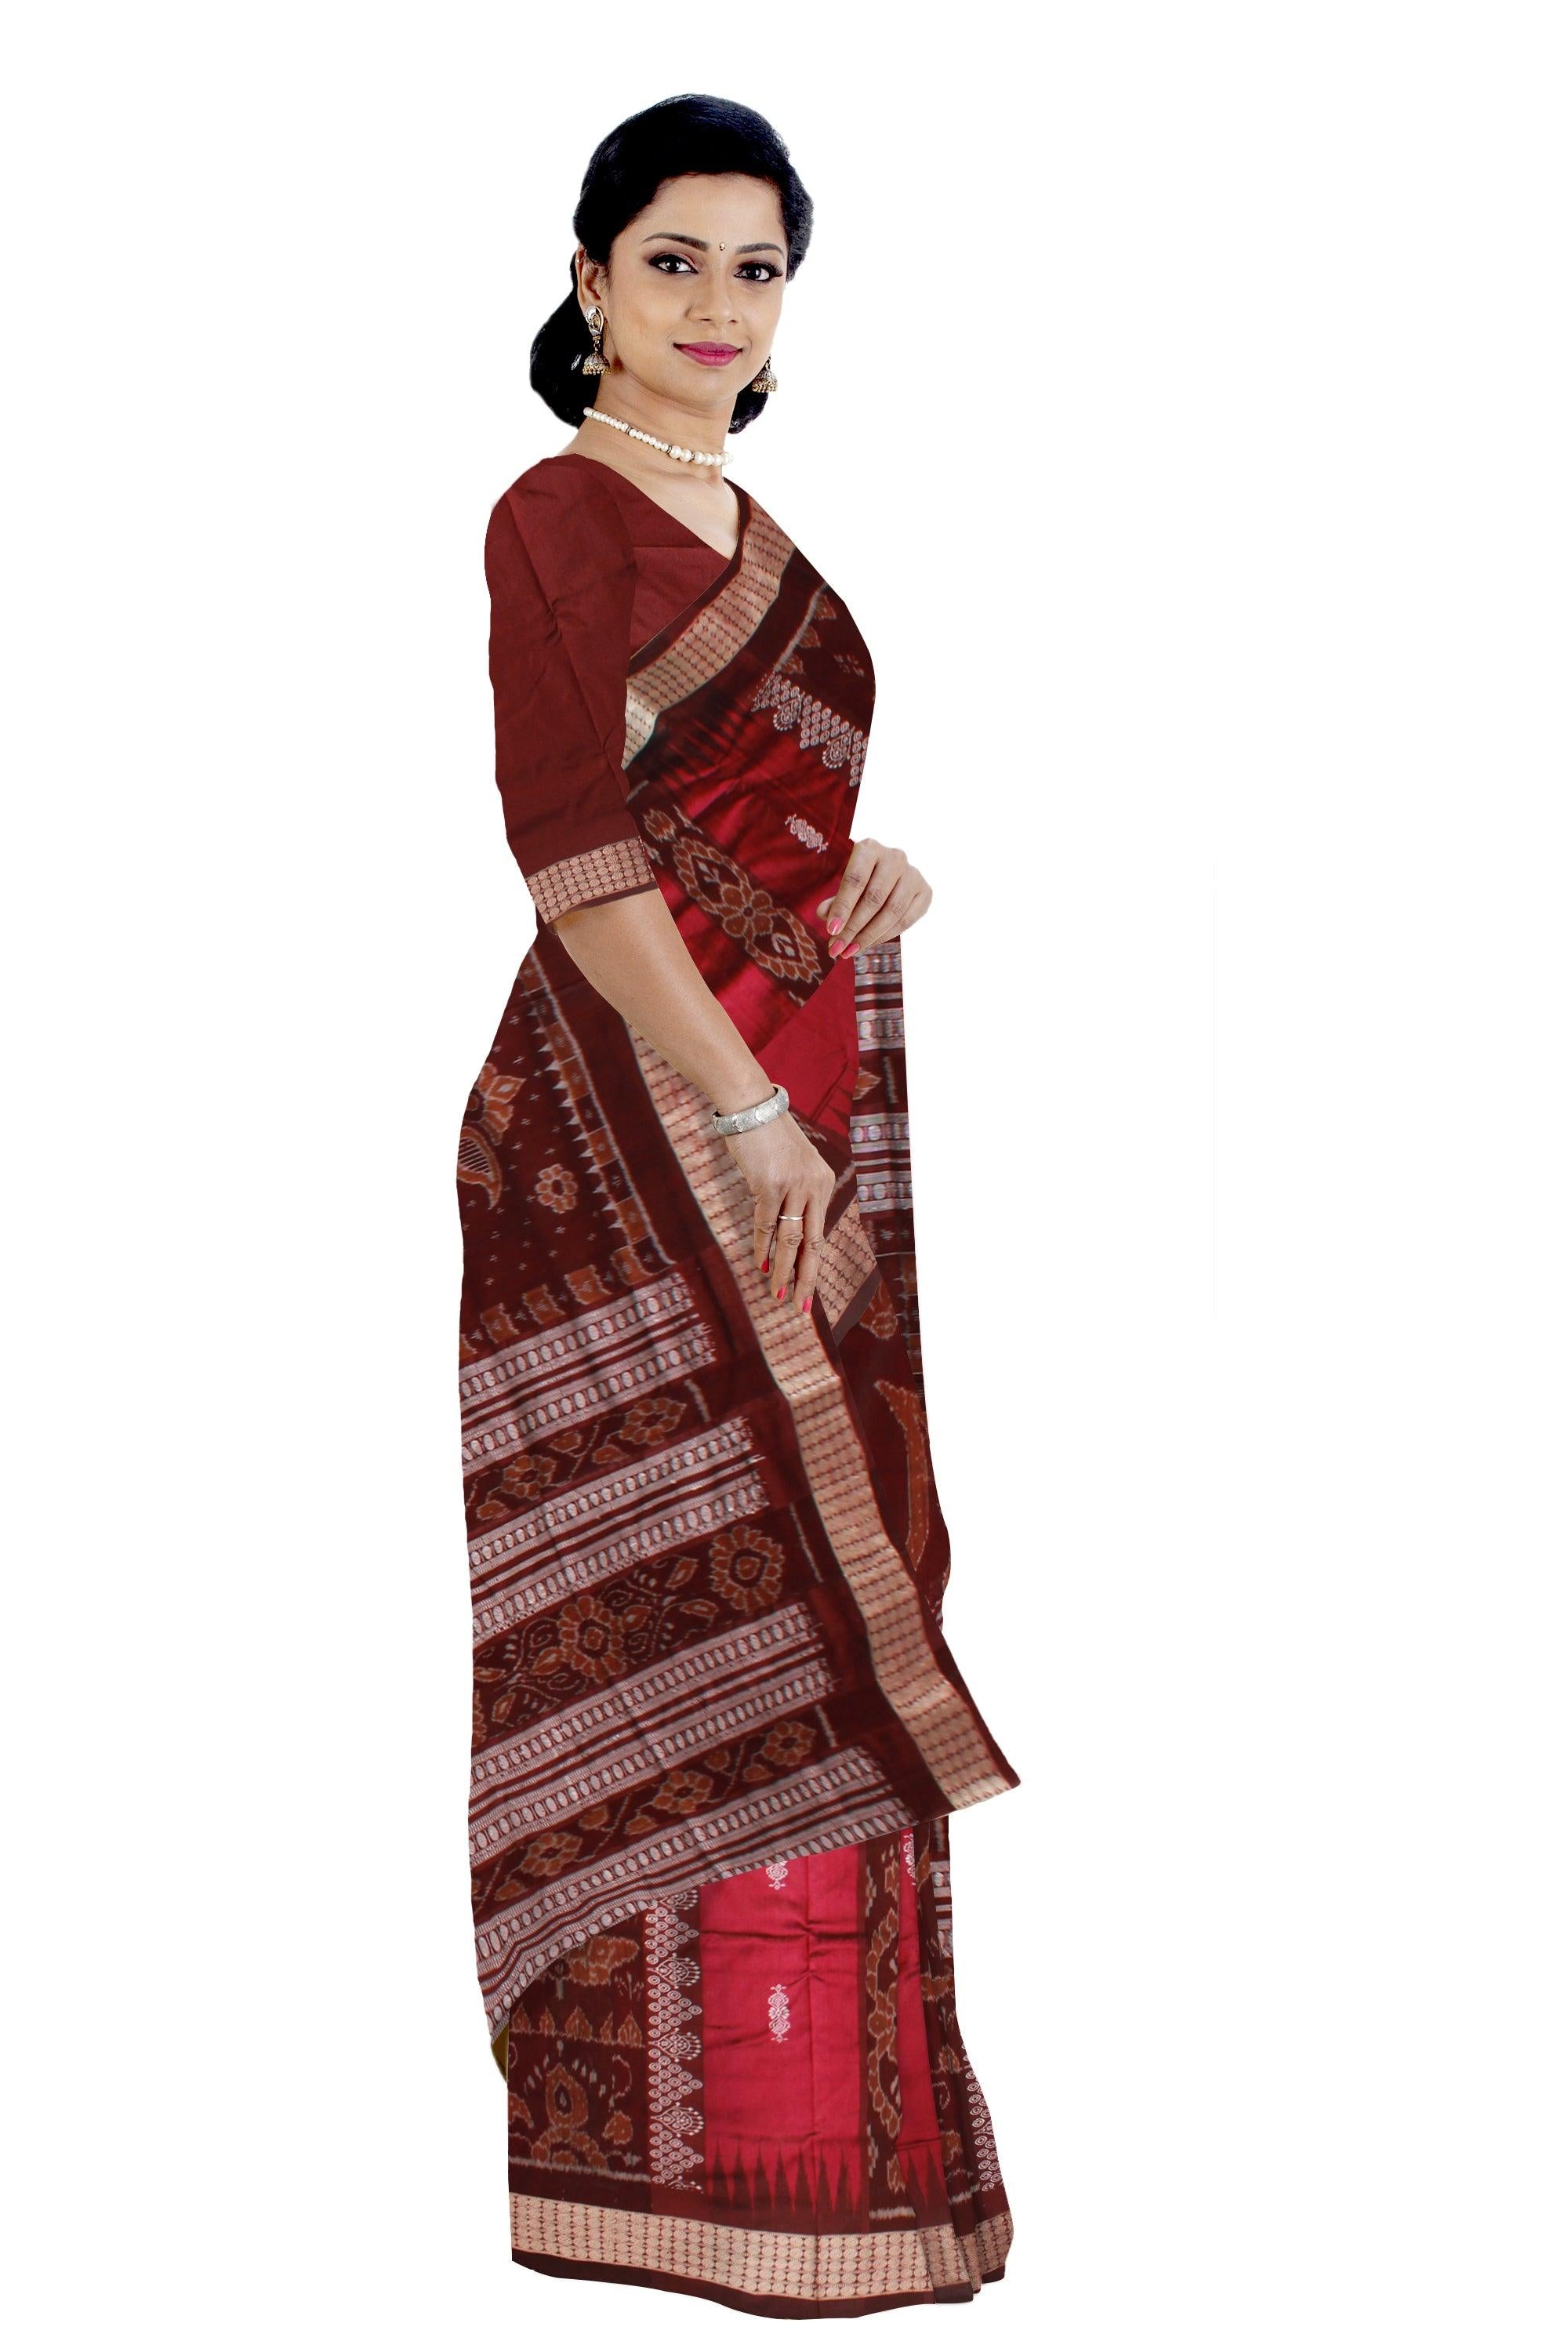 BANDHA PATTERN BOMKEI PATA SAREE IN  PINK AND COFFEE COLOR BASE, ATTACHED WITH BLOUSE PIECE. - Koshali Arts & Crafts Enterprise